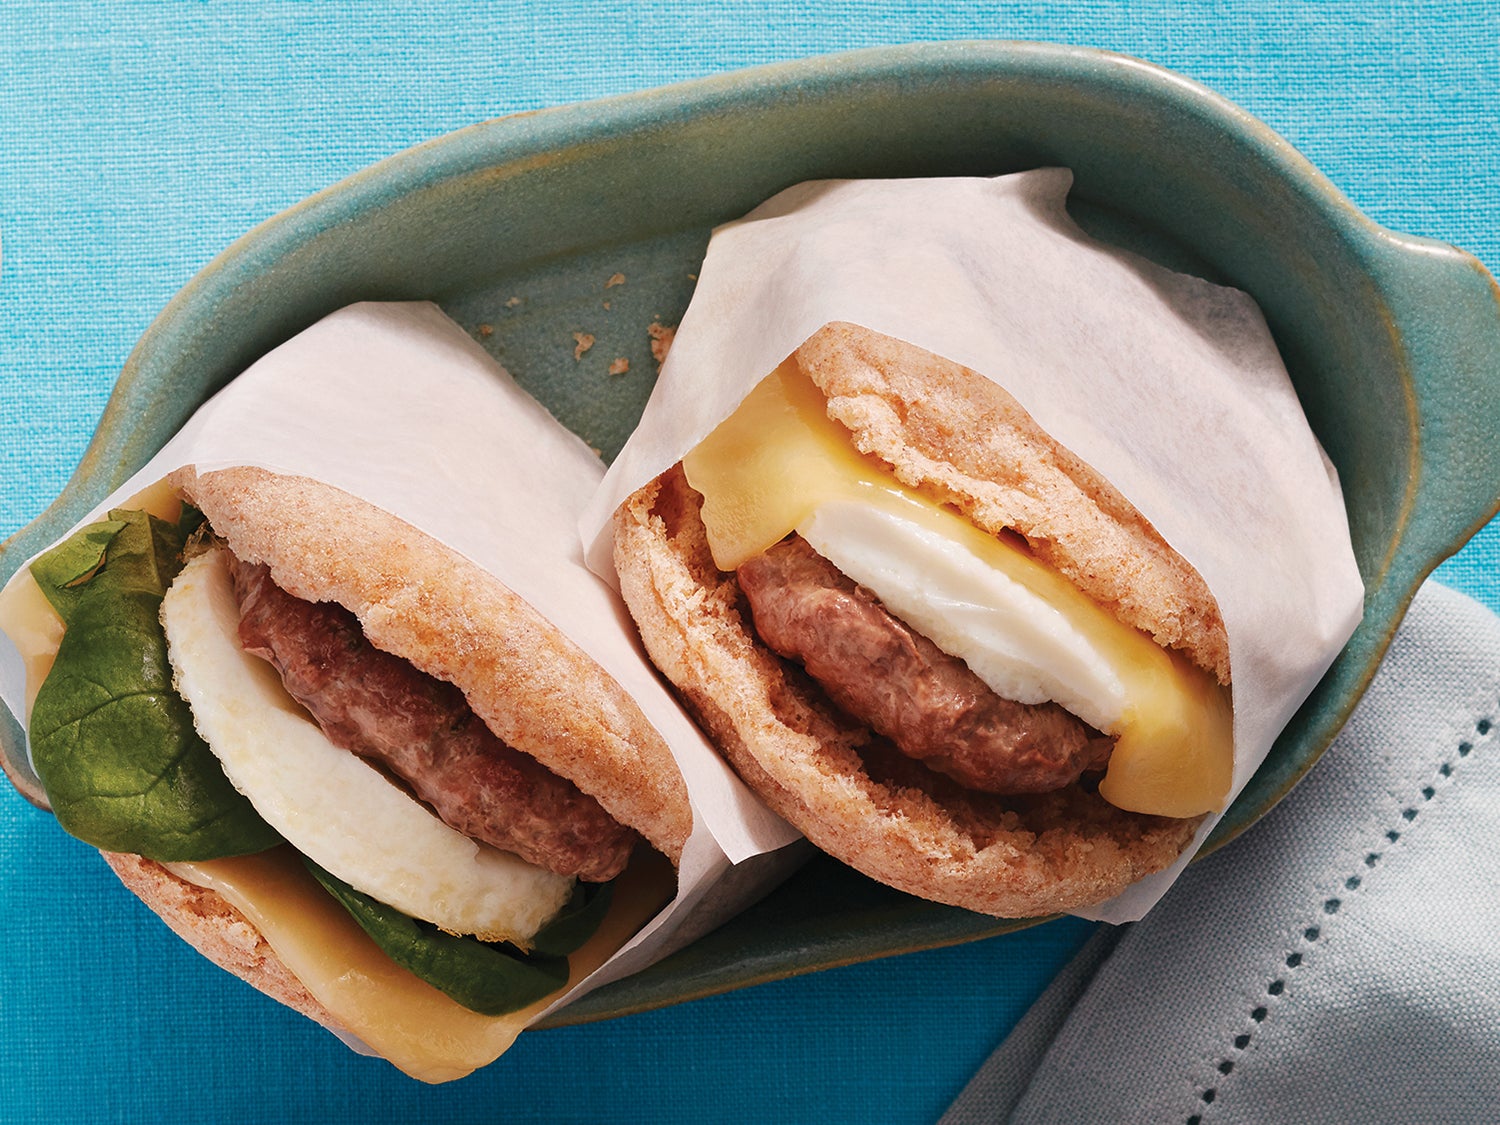 https://cdn.cleaneatingmag.com/wp-content/uploads/2017/01/sausage-egg-and-cheddar-breakfast-sandwiches-1.jpg?crop=4:3&width=1600